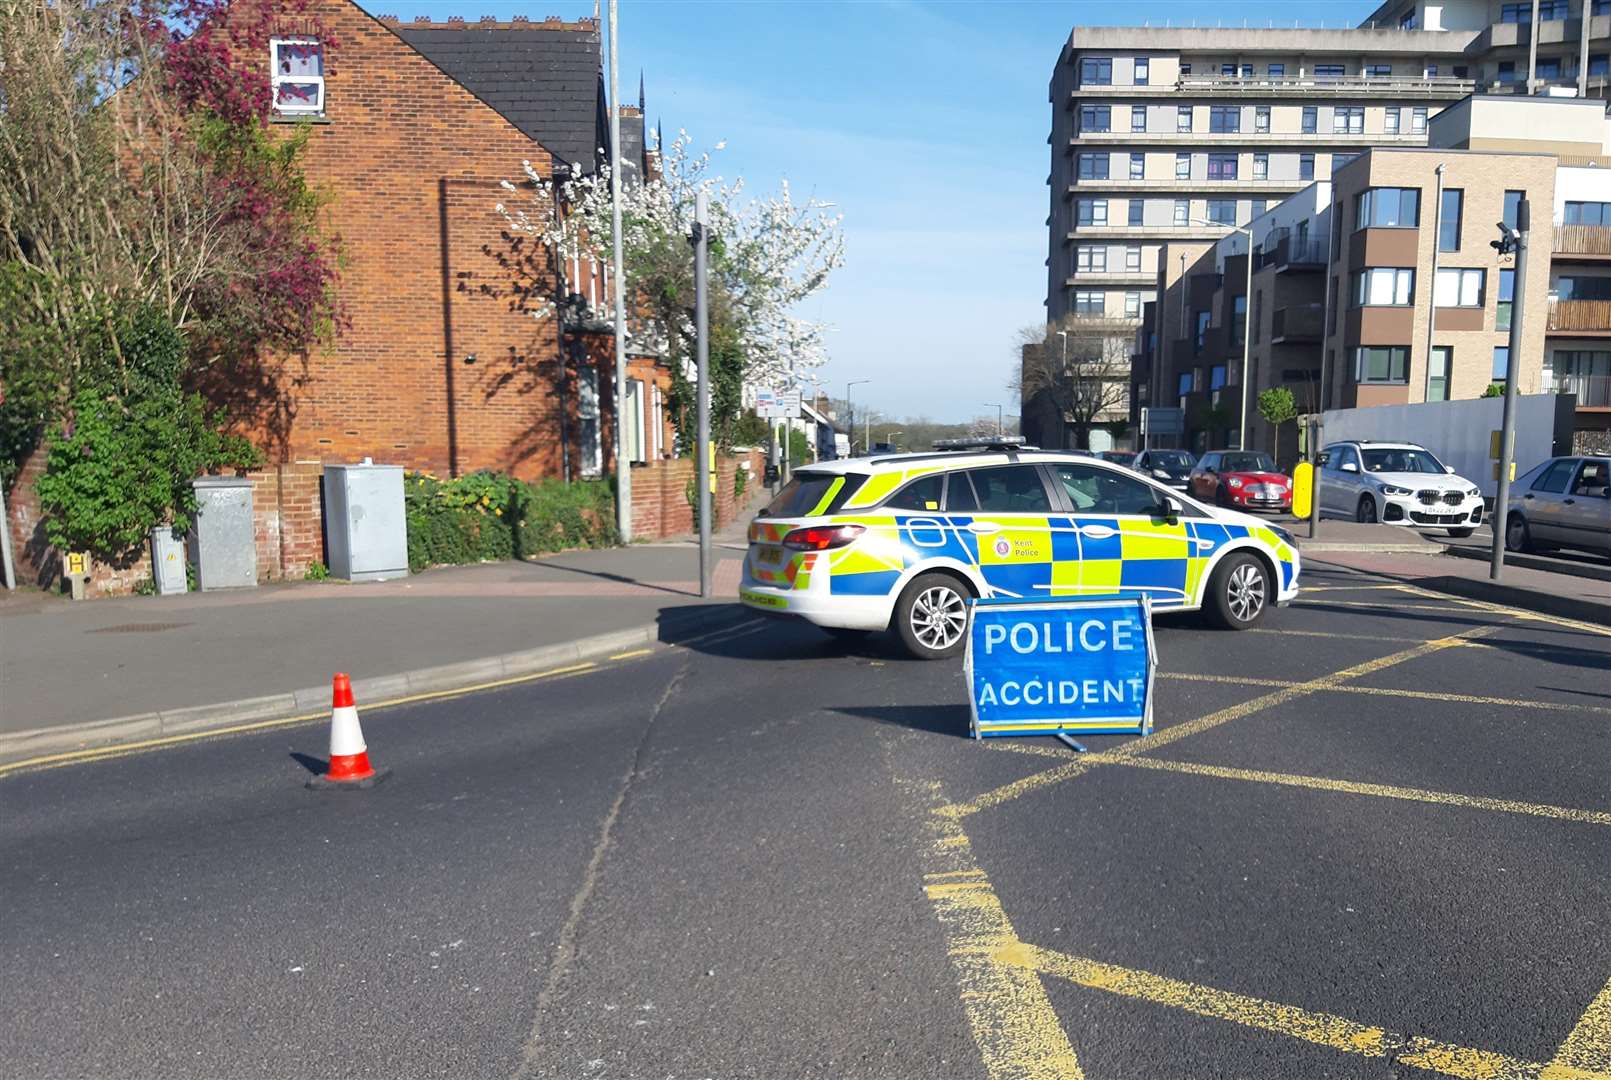 Police are at the scene near Ashford town centre. Photo: @KentPoliceAsh